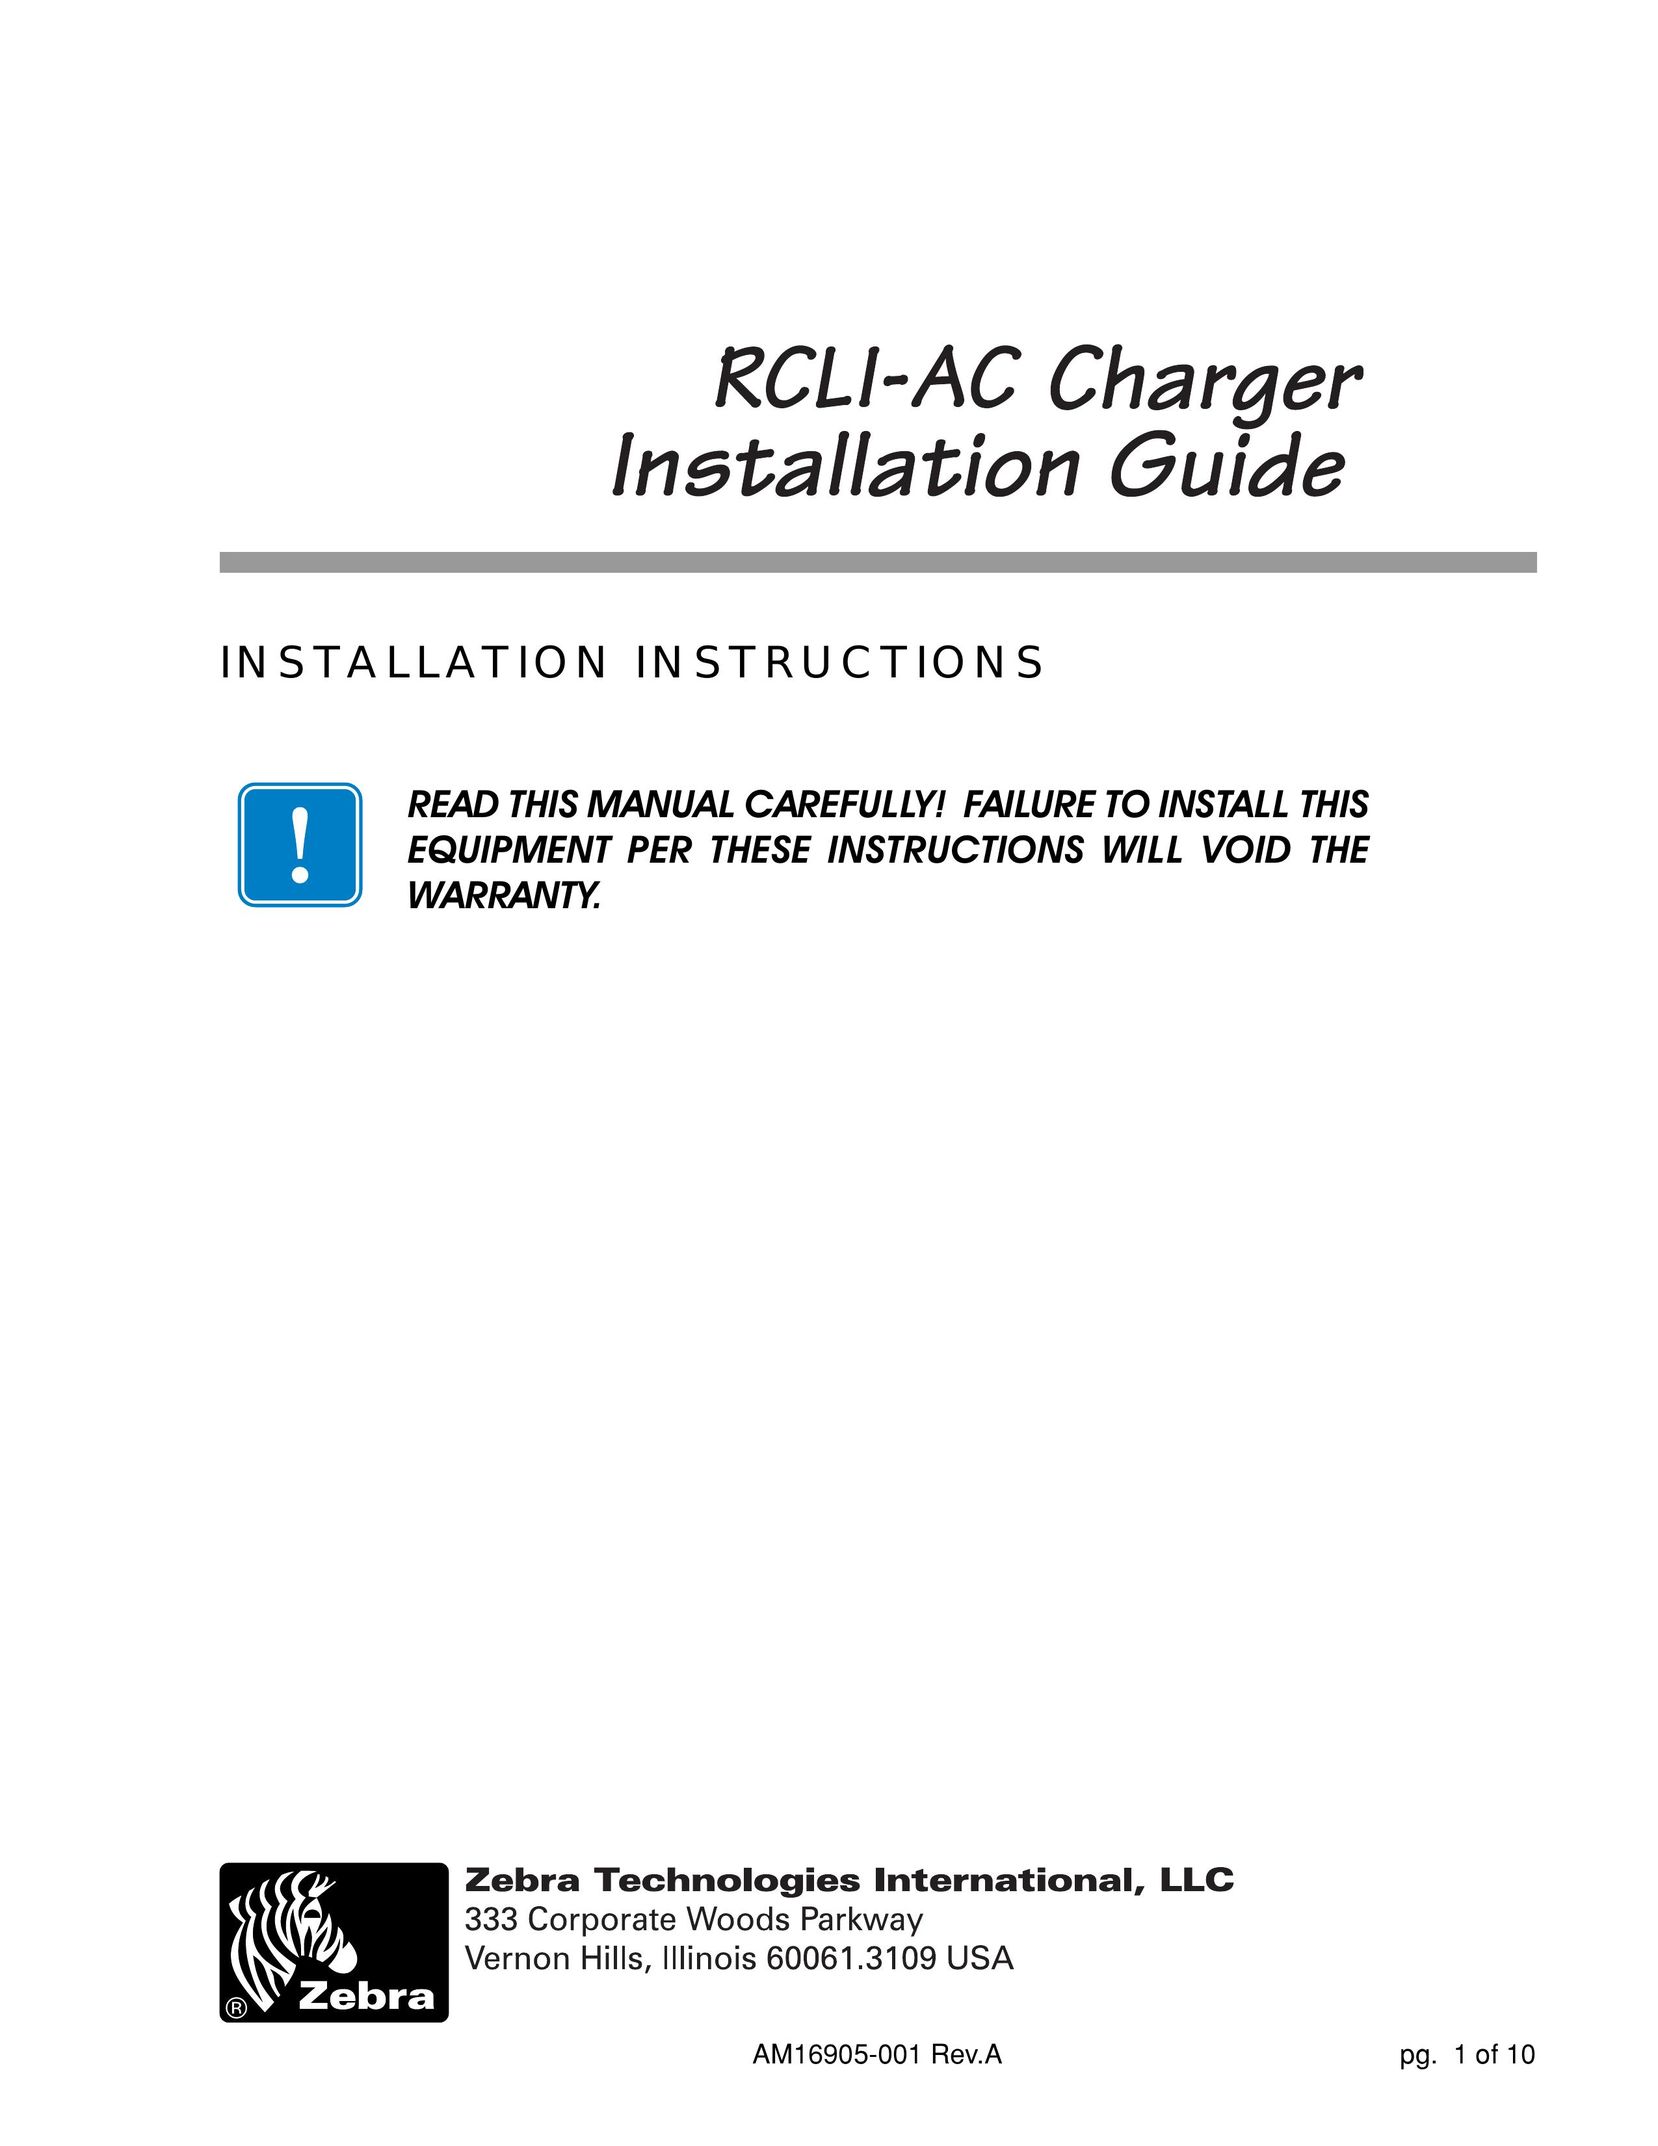 Zebra Technologies rcli-ac charger Battery Charger User Manual